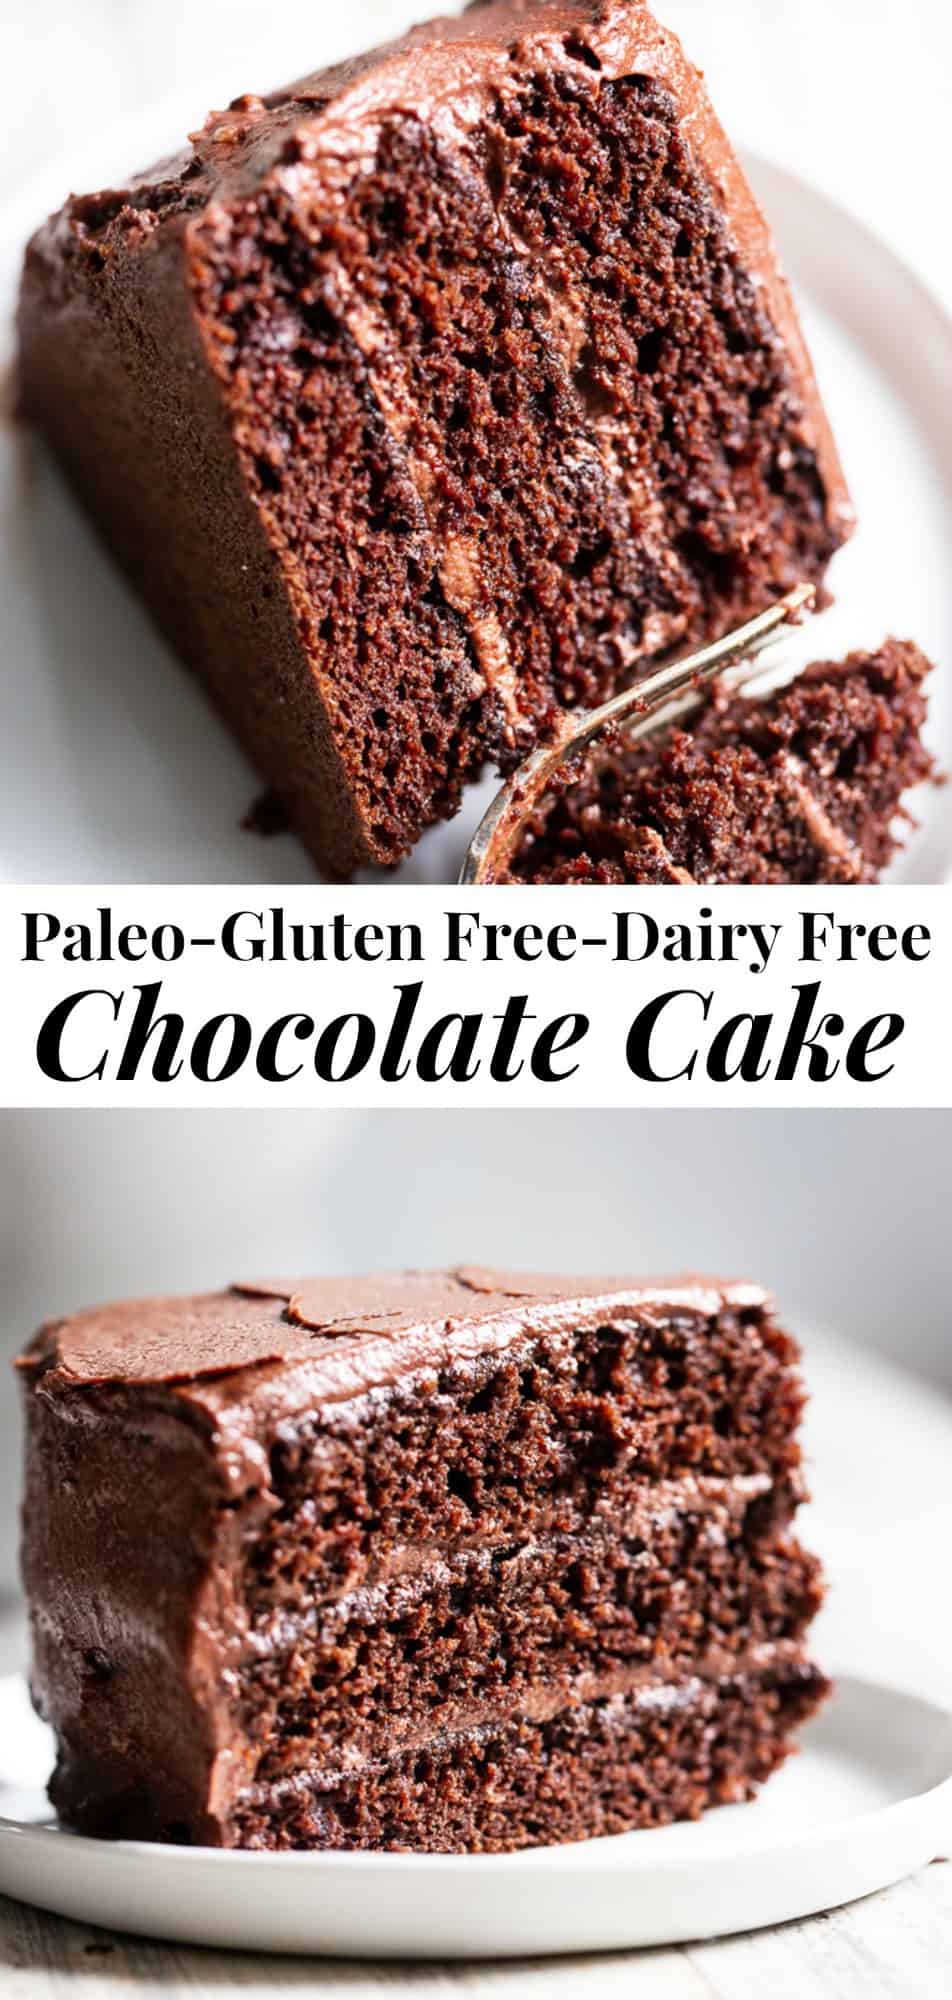 This rich, decadent, moist and tender paleo chocolate cake is the perfect healthy dessert recipe for birthdays and special occasions!  Made with a blend of grain free flours, organic coconut oil and unrefined coconut sugar.  The dairy-free “buttercream” frosting is out of this world delicious and NONE of it tastes paleo, even though it totally is! #paleo #glutenfree #cleaneating